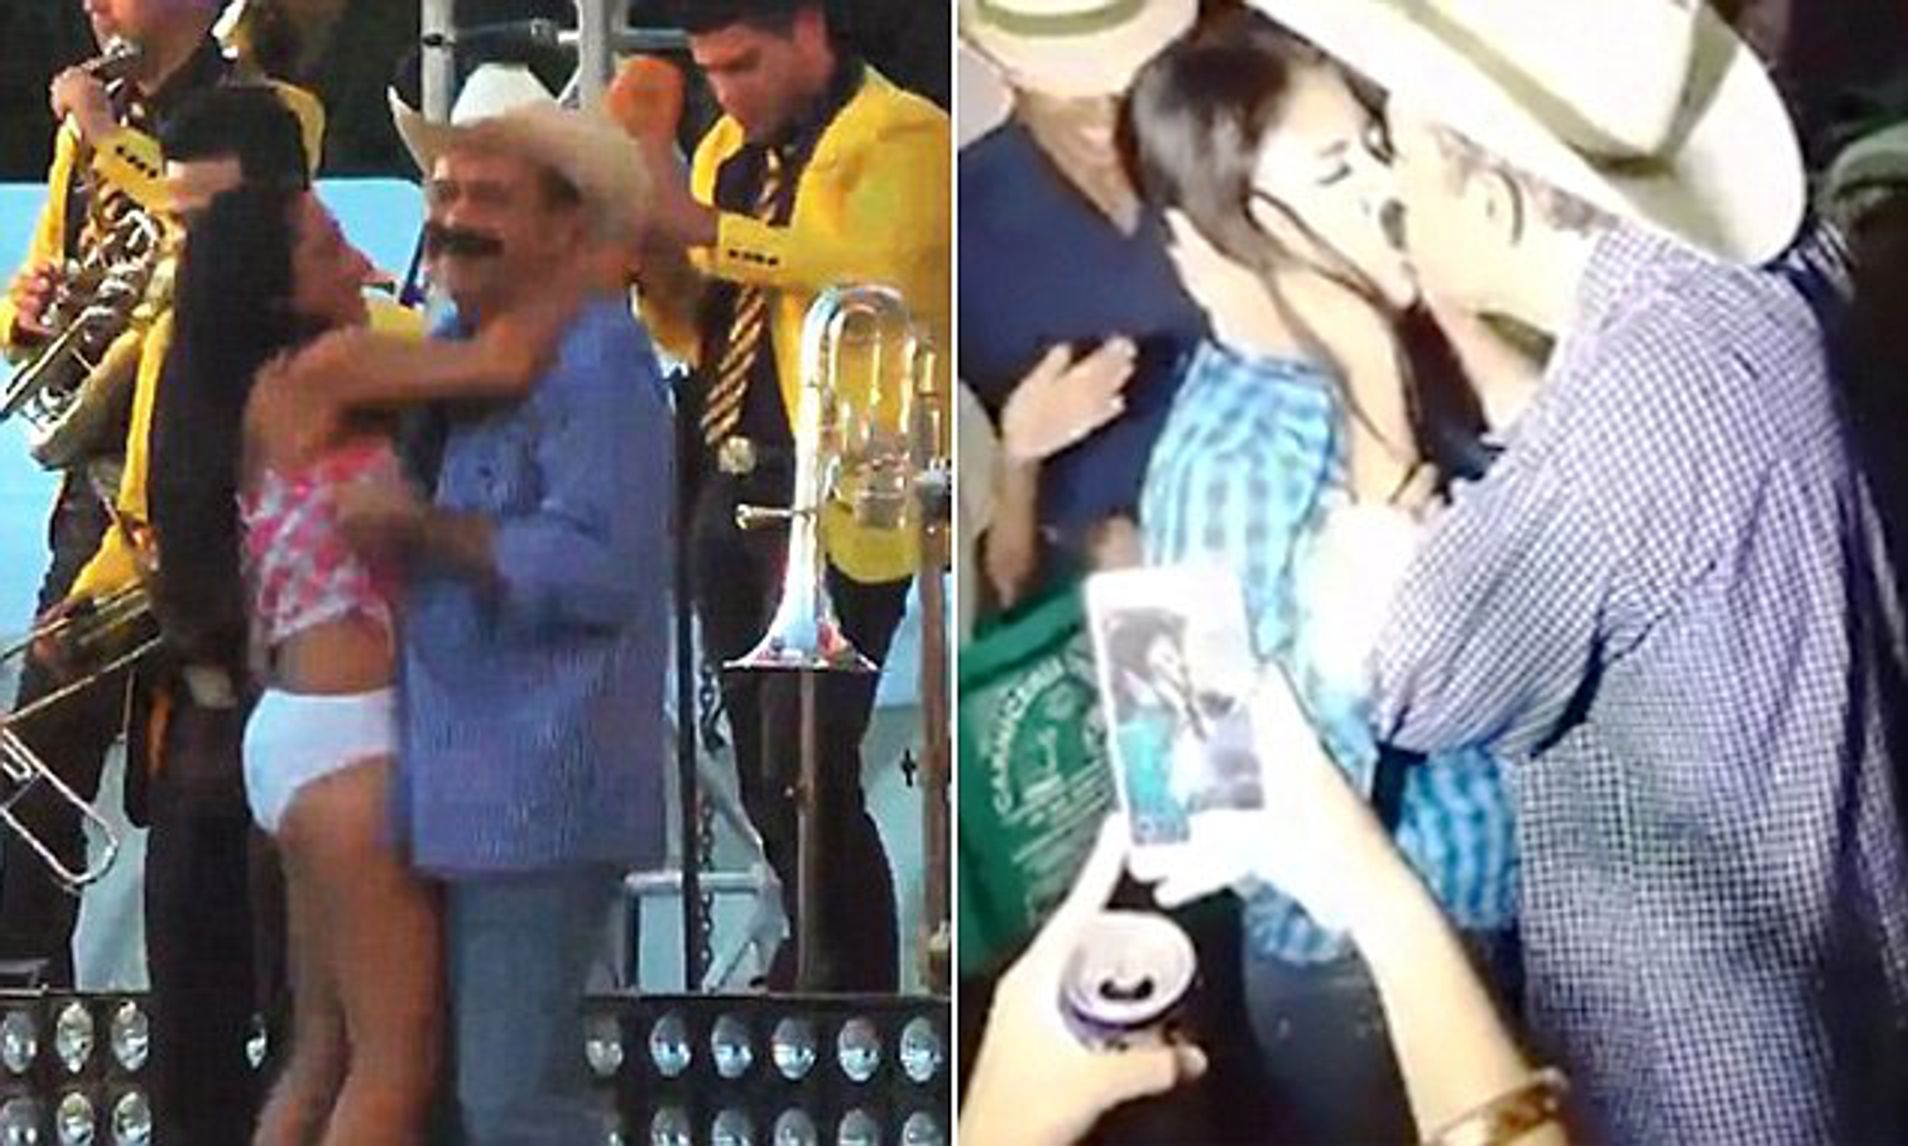 andrew chlebek add hot mexican girls kissing photo